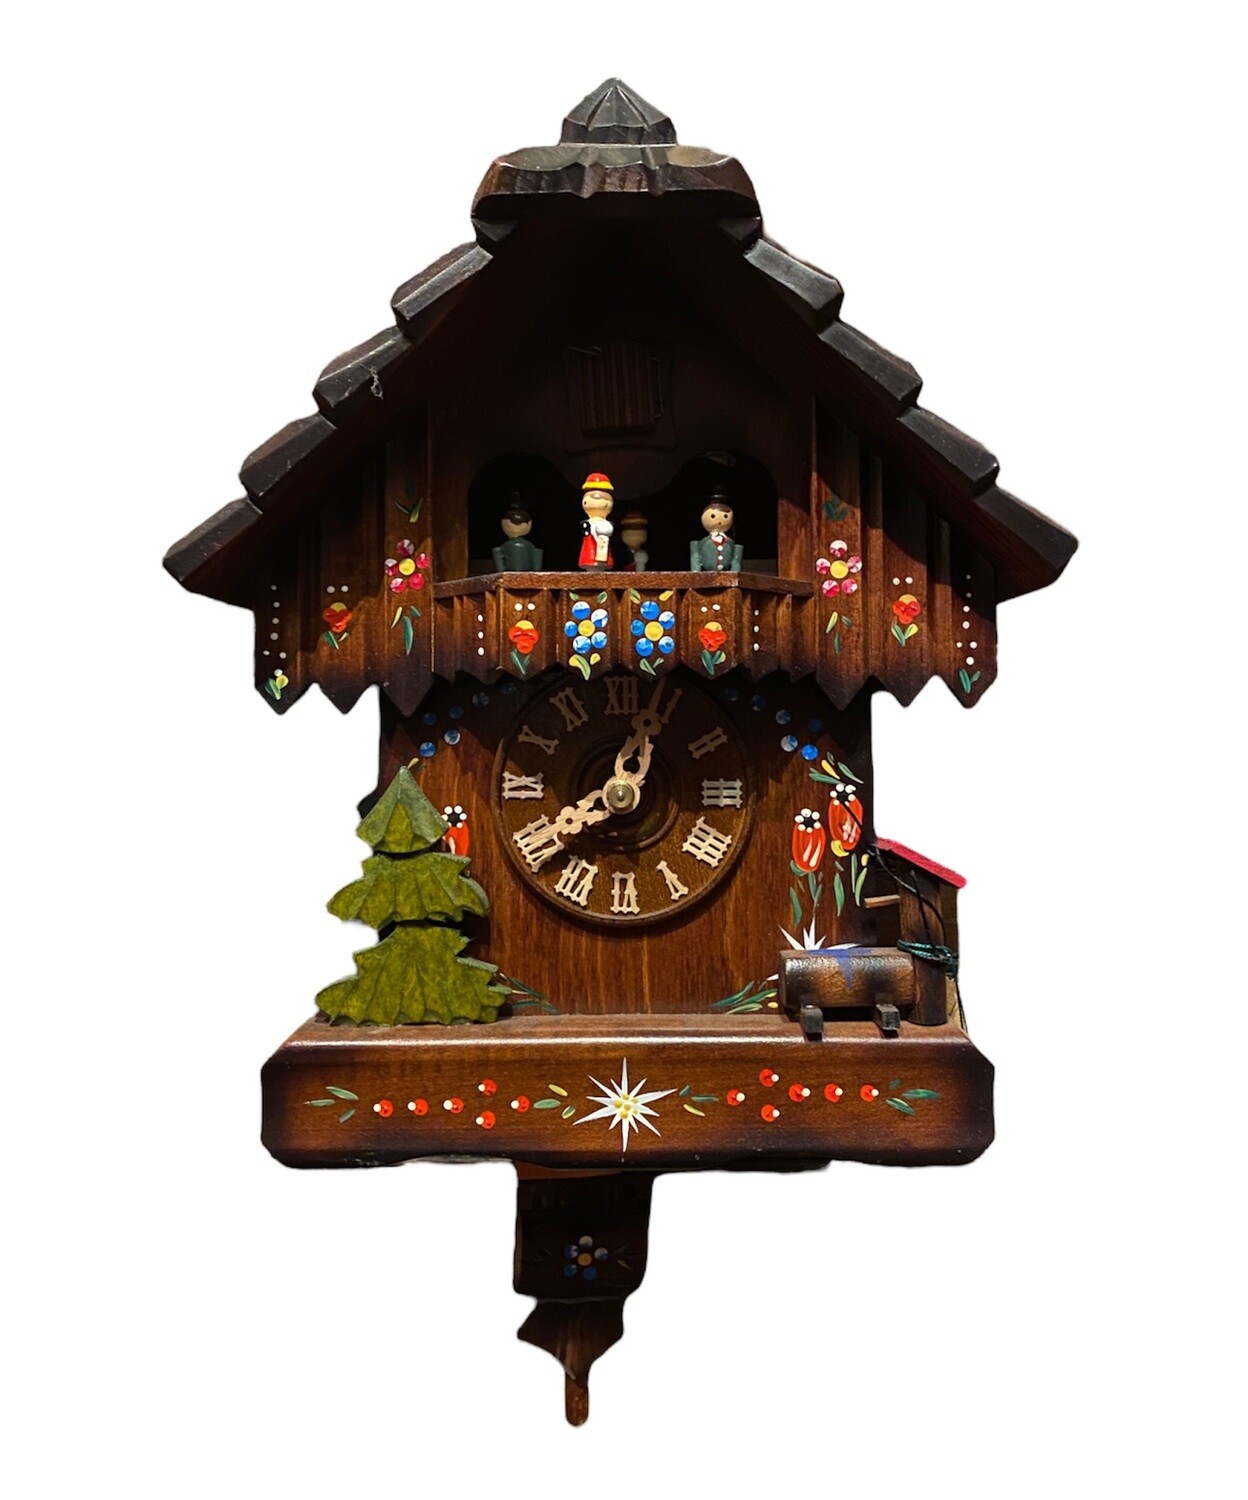 1-Day Chalet Musical with Dancers Cuckoo Clock